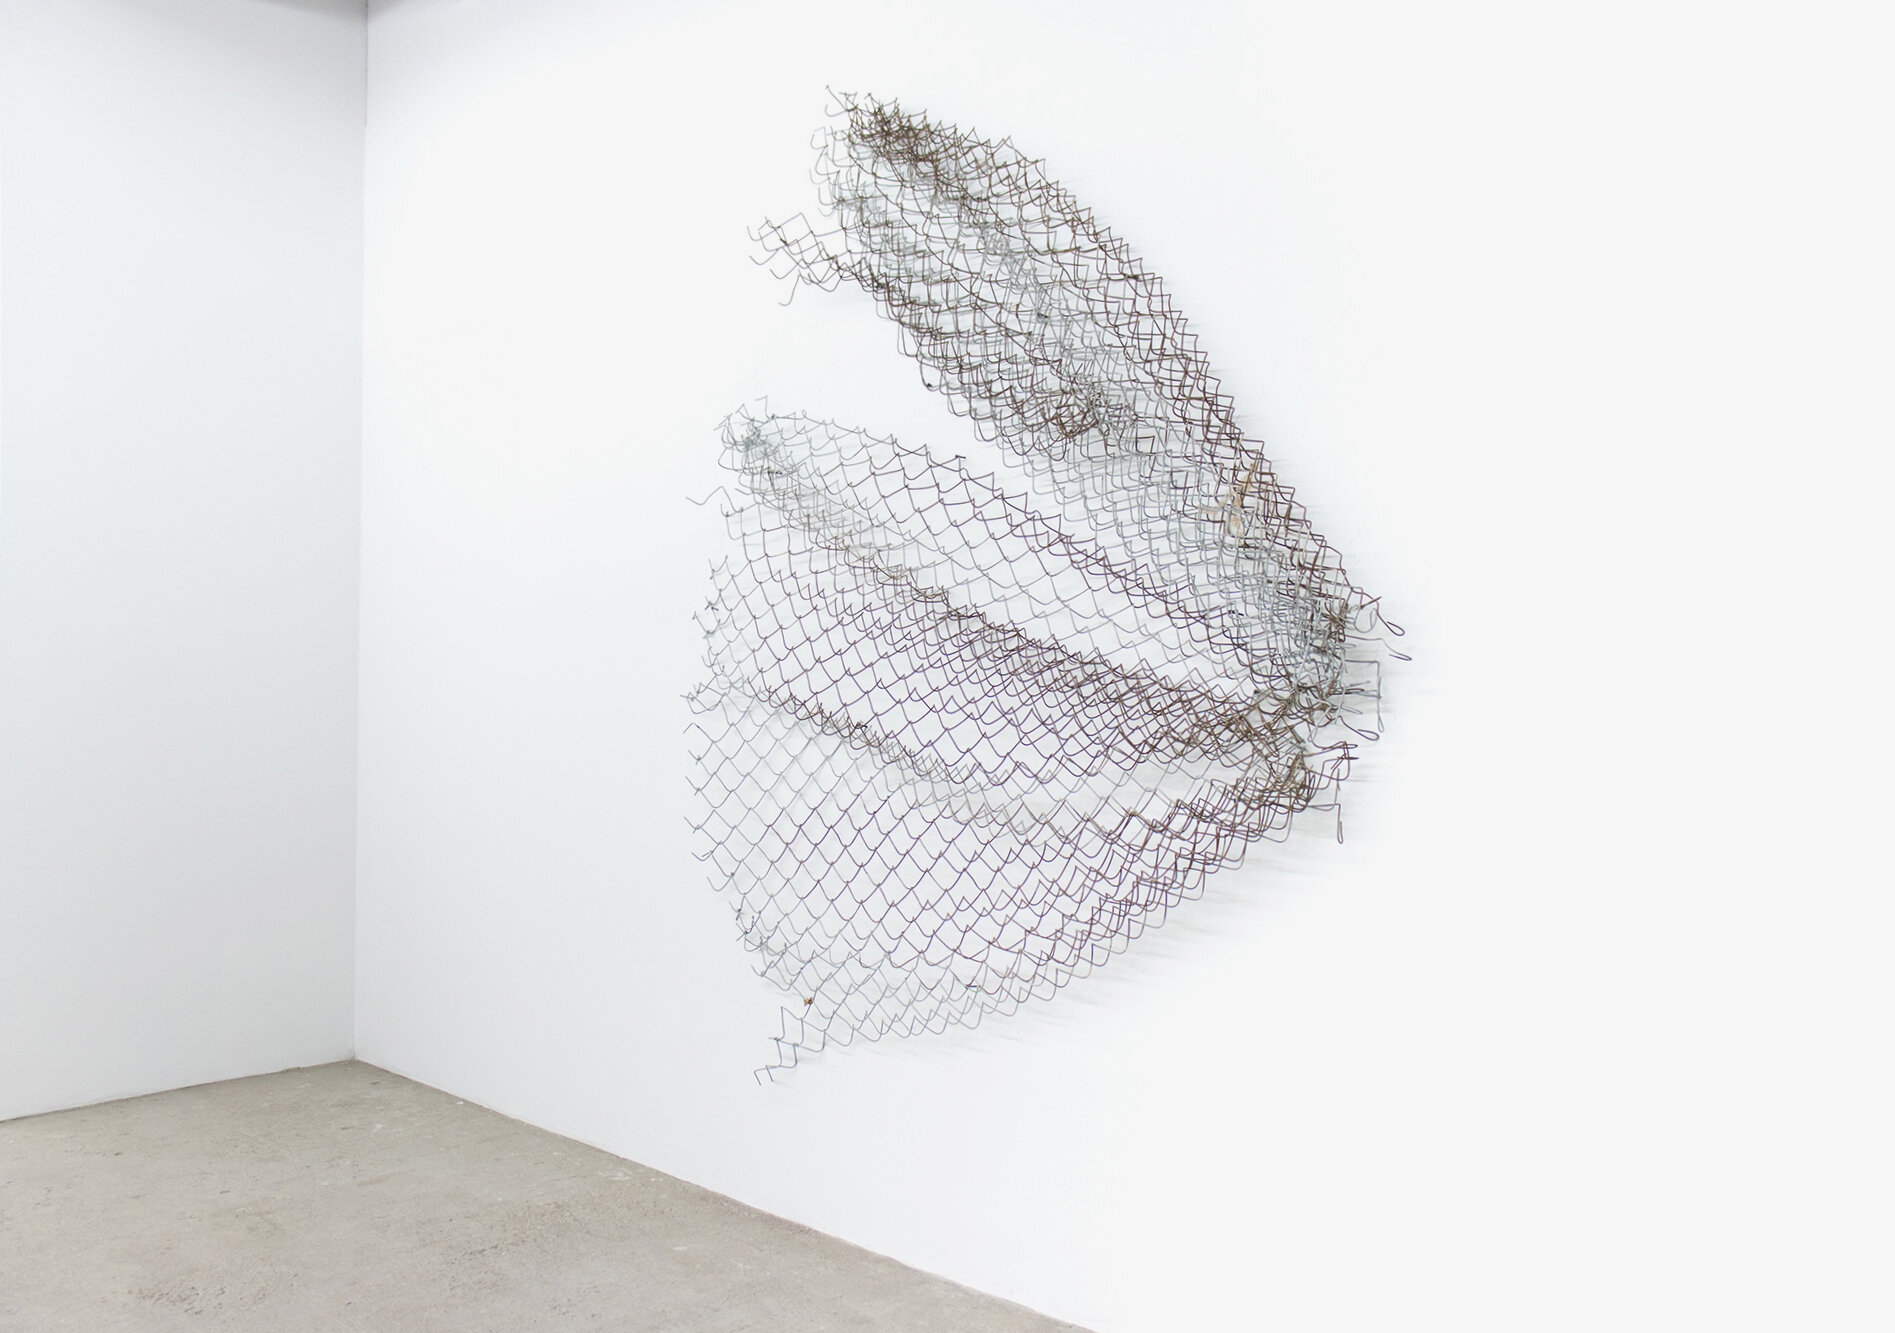  Sean Donovan  Untitled , 2018 acid soaked galvanized chain-link fencing, screws 83 x 72 x 9 inches (211 x 183 x 23 cm) (SD46) 